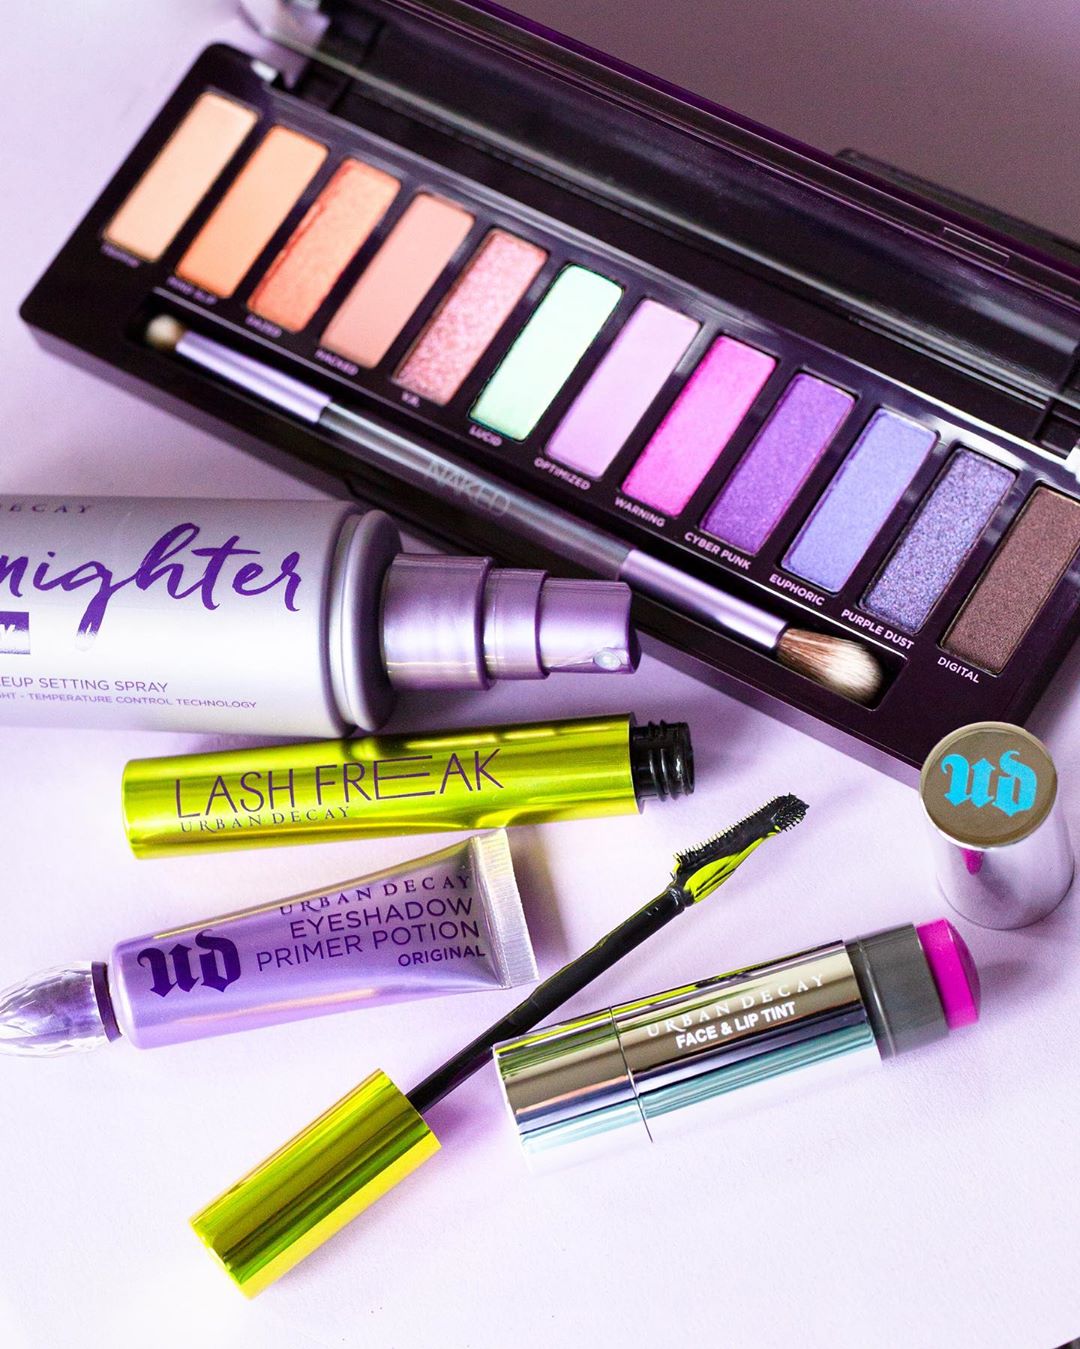 Urban Decay Cosmetics - *ADDS TO BAG* Have you gotten in on all of our NEW NEW? From All Nighter Ultra Glow to NAKED Ultraviolet Eyeshadow Palette and Lash Freak Mascara—we're saying "YES" to it all....